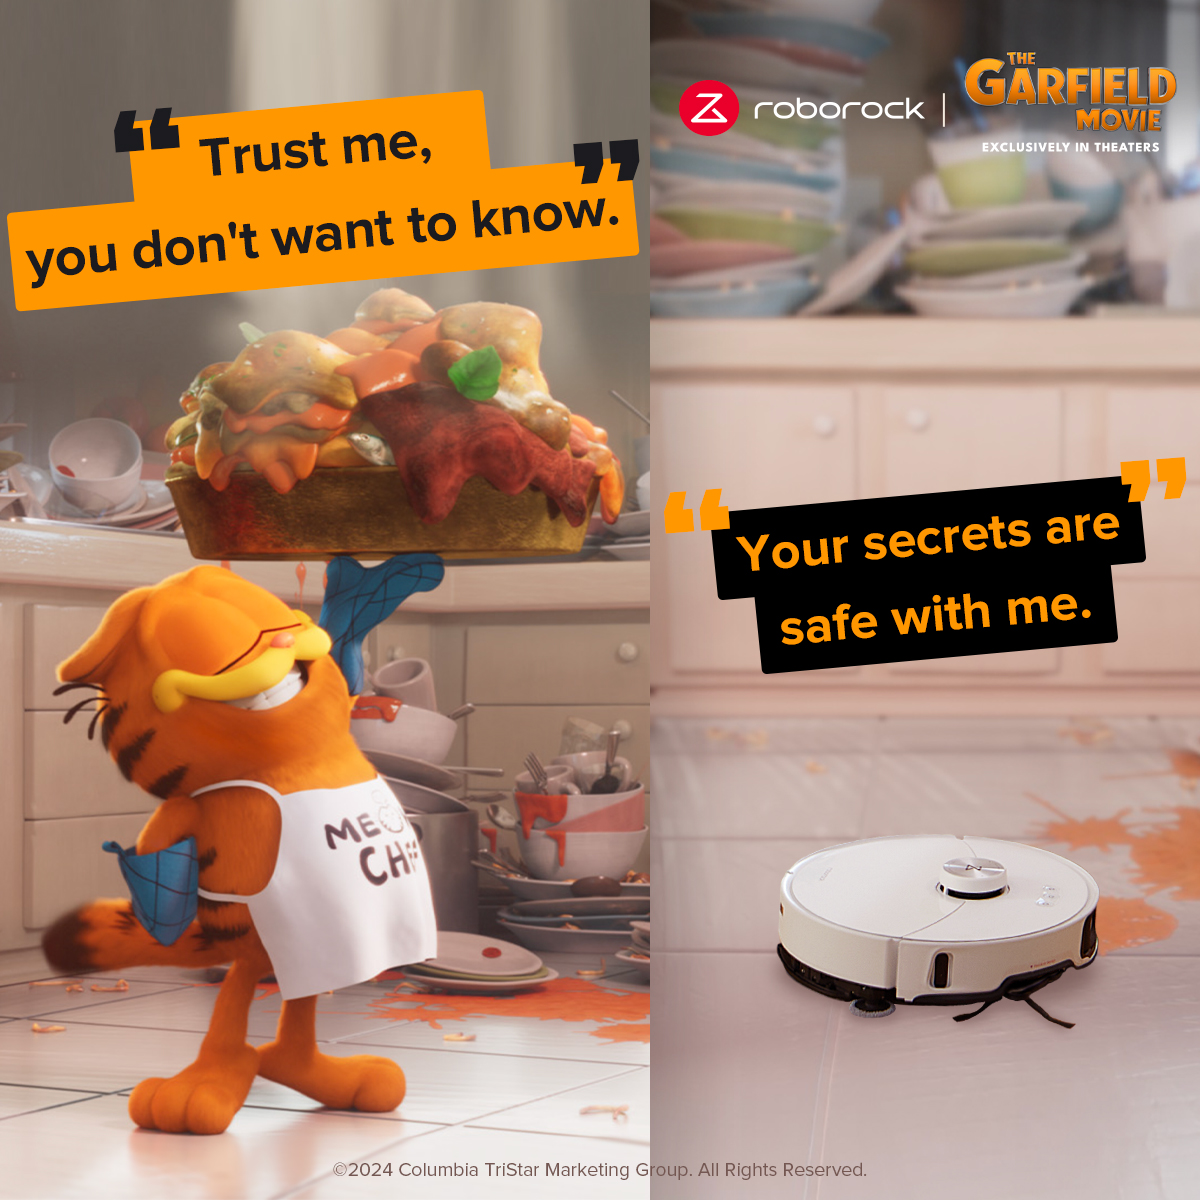 Sometimes, Garfield's home can be a mess, but it's okay!😺 Roborock is always there to help silently. Not only does it keep your secrets safe, but it also cleans your home thoroughly✨ Watch The Garfield Movie, exclusively in theaters!